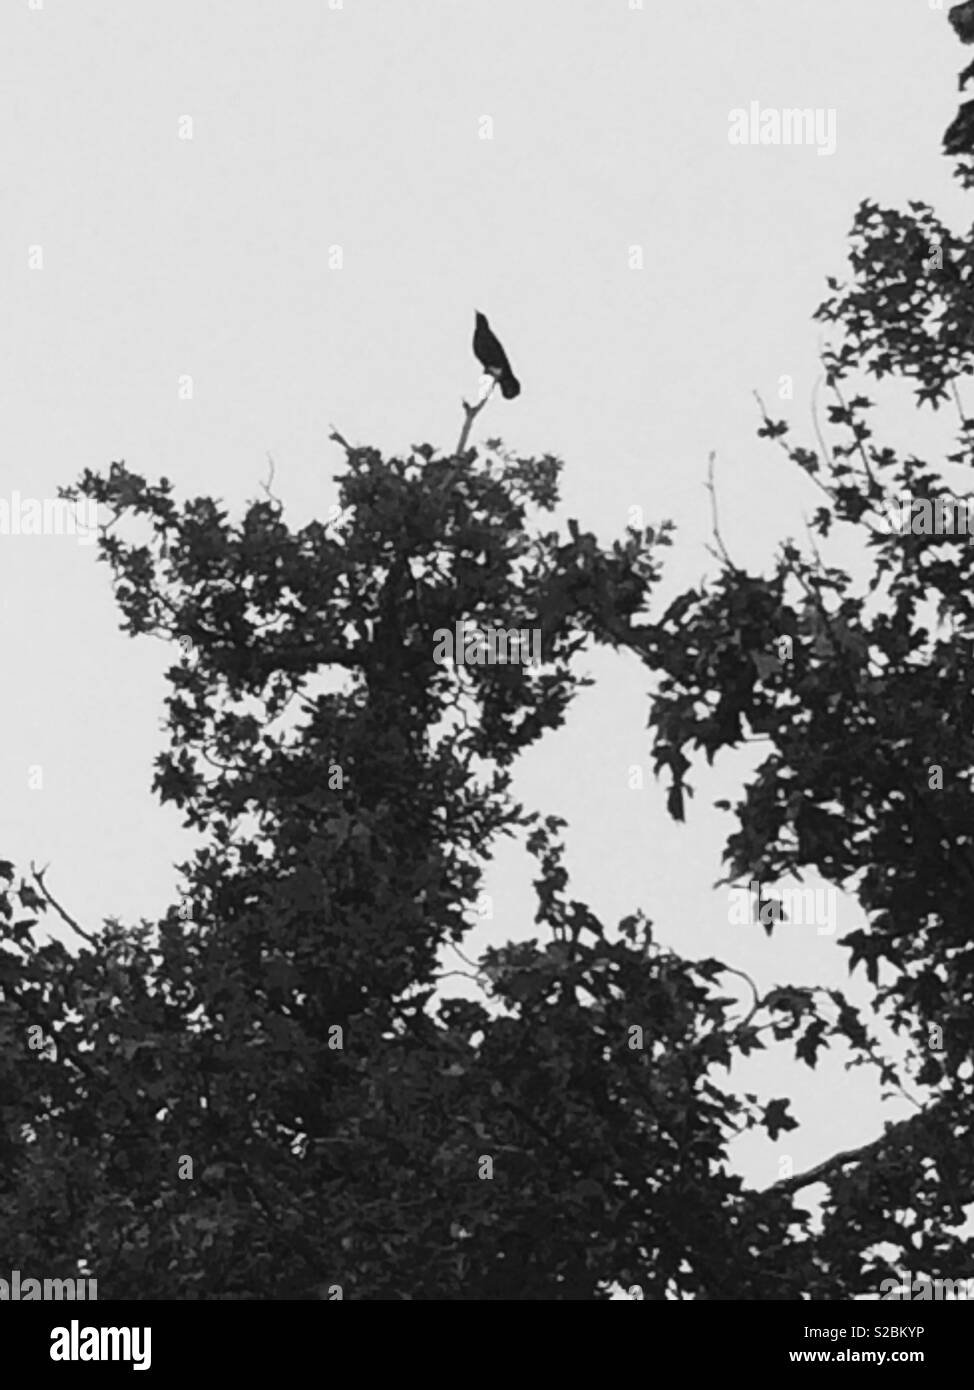 Black and white photo of silhouette of a bird on top of a tree Stock Photo